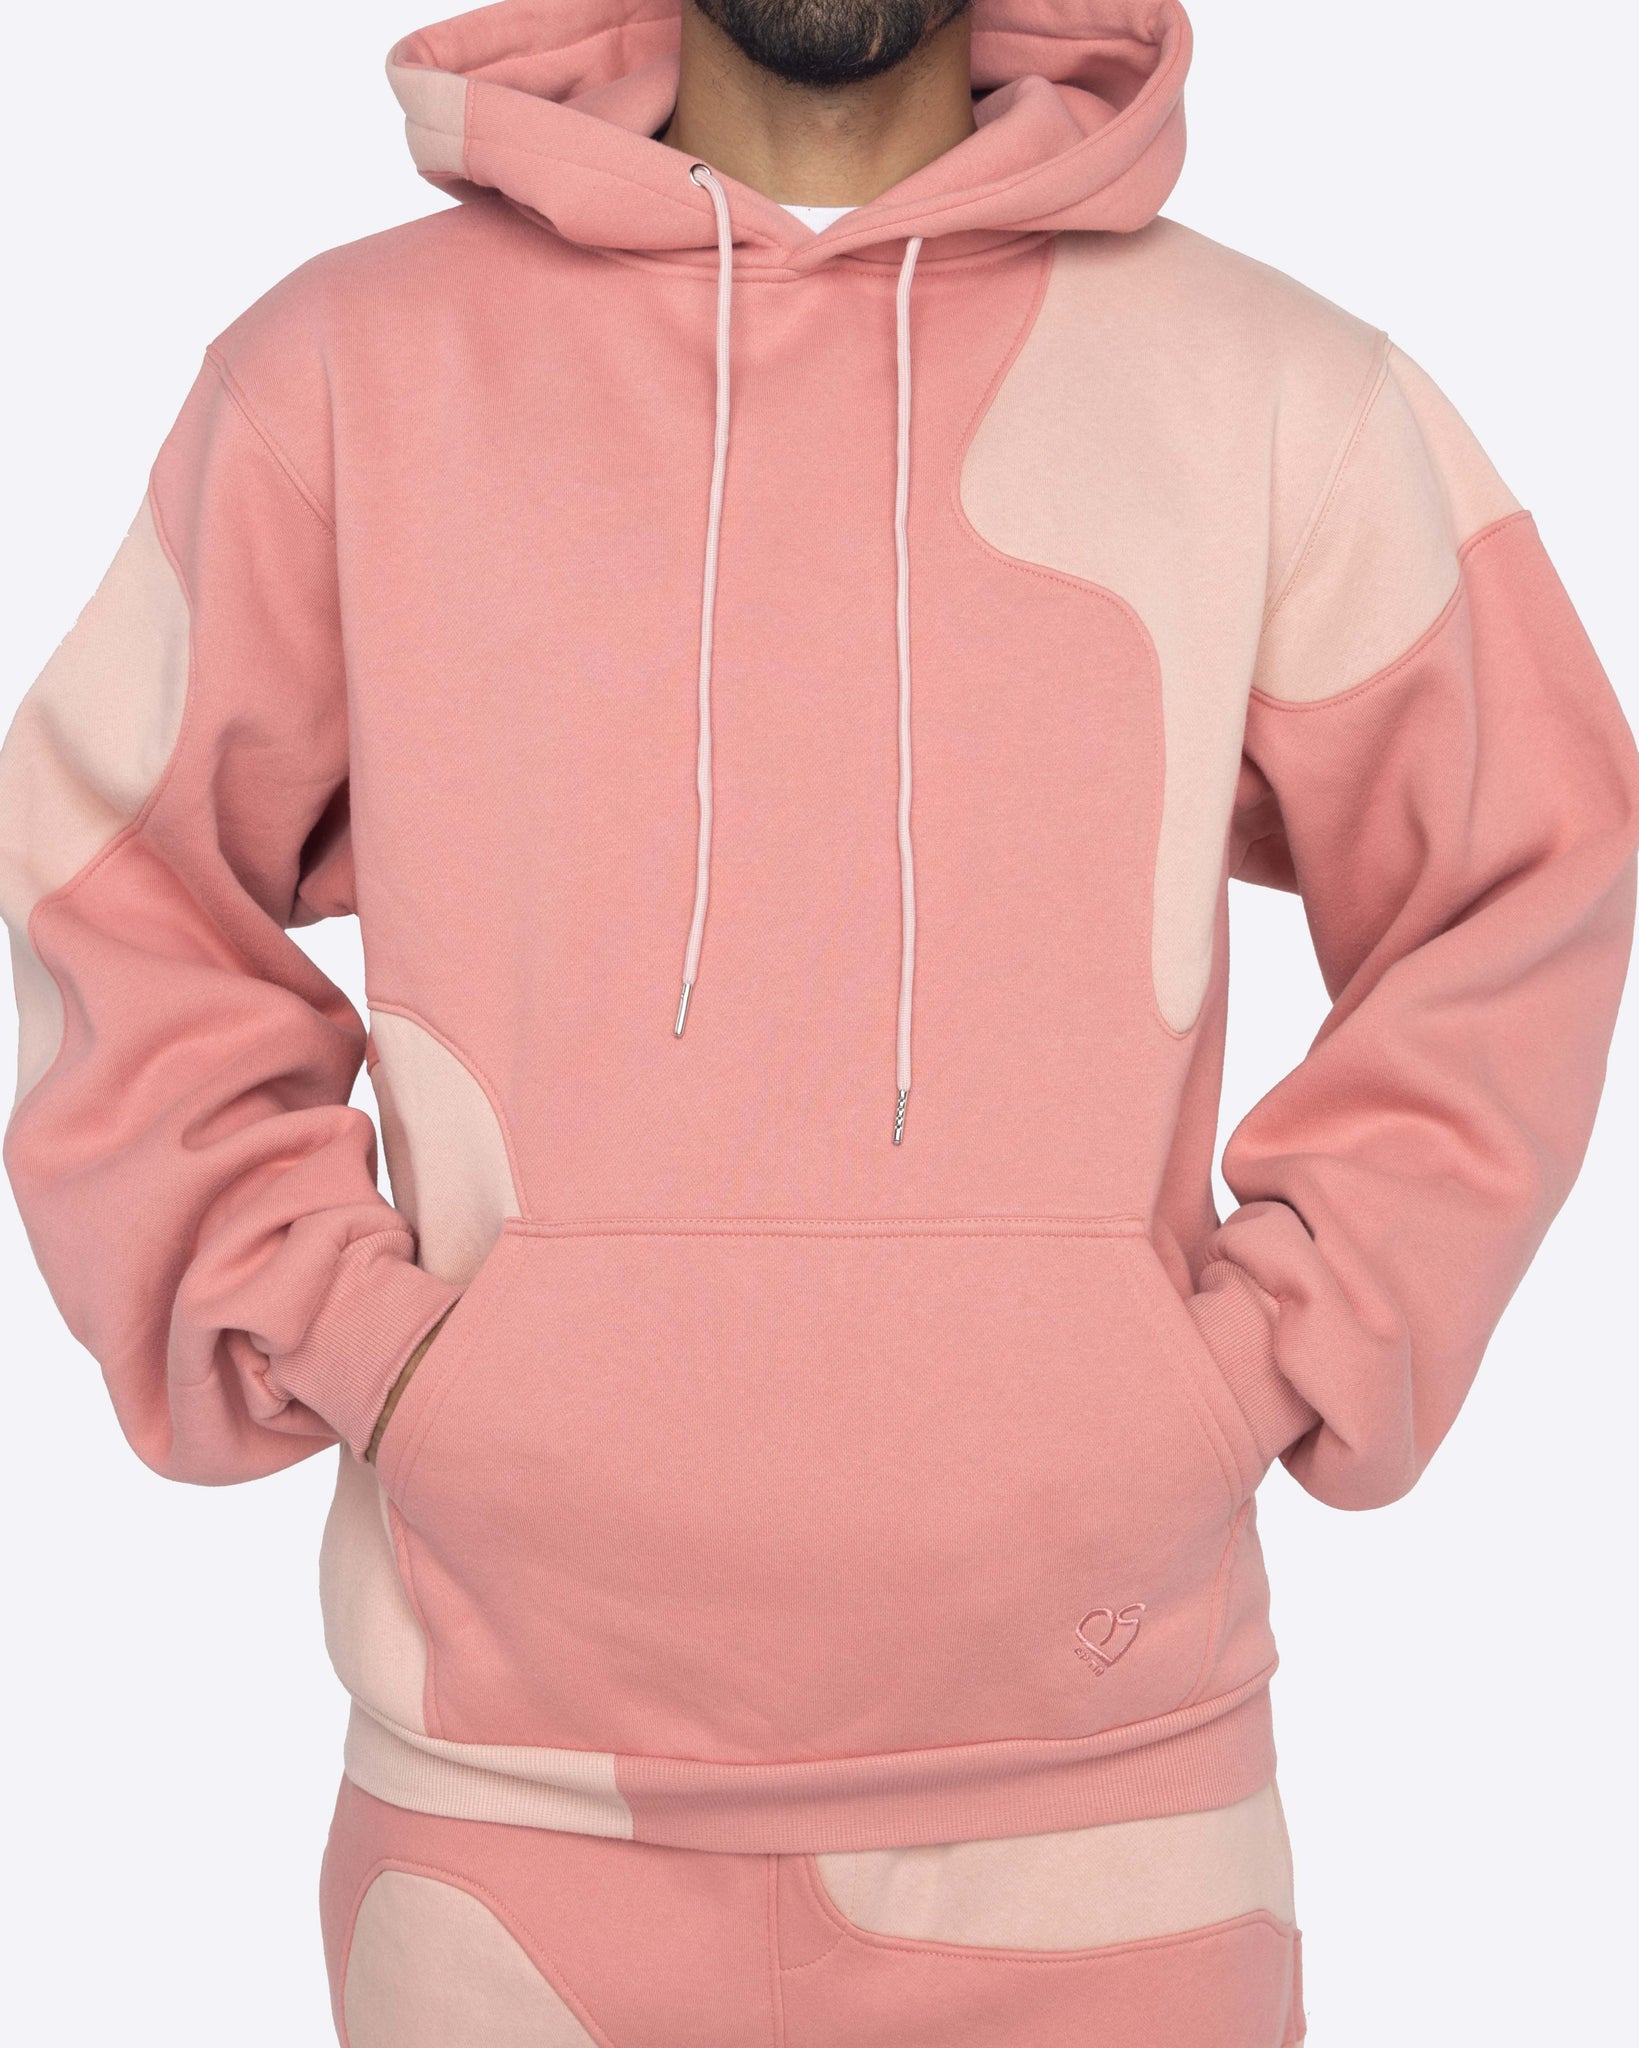 EPTM X PASCAL MARBLE HOODIE-PINK